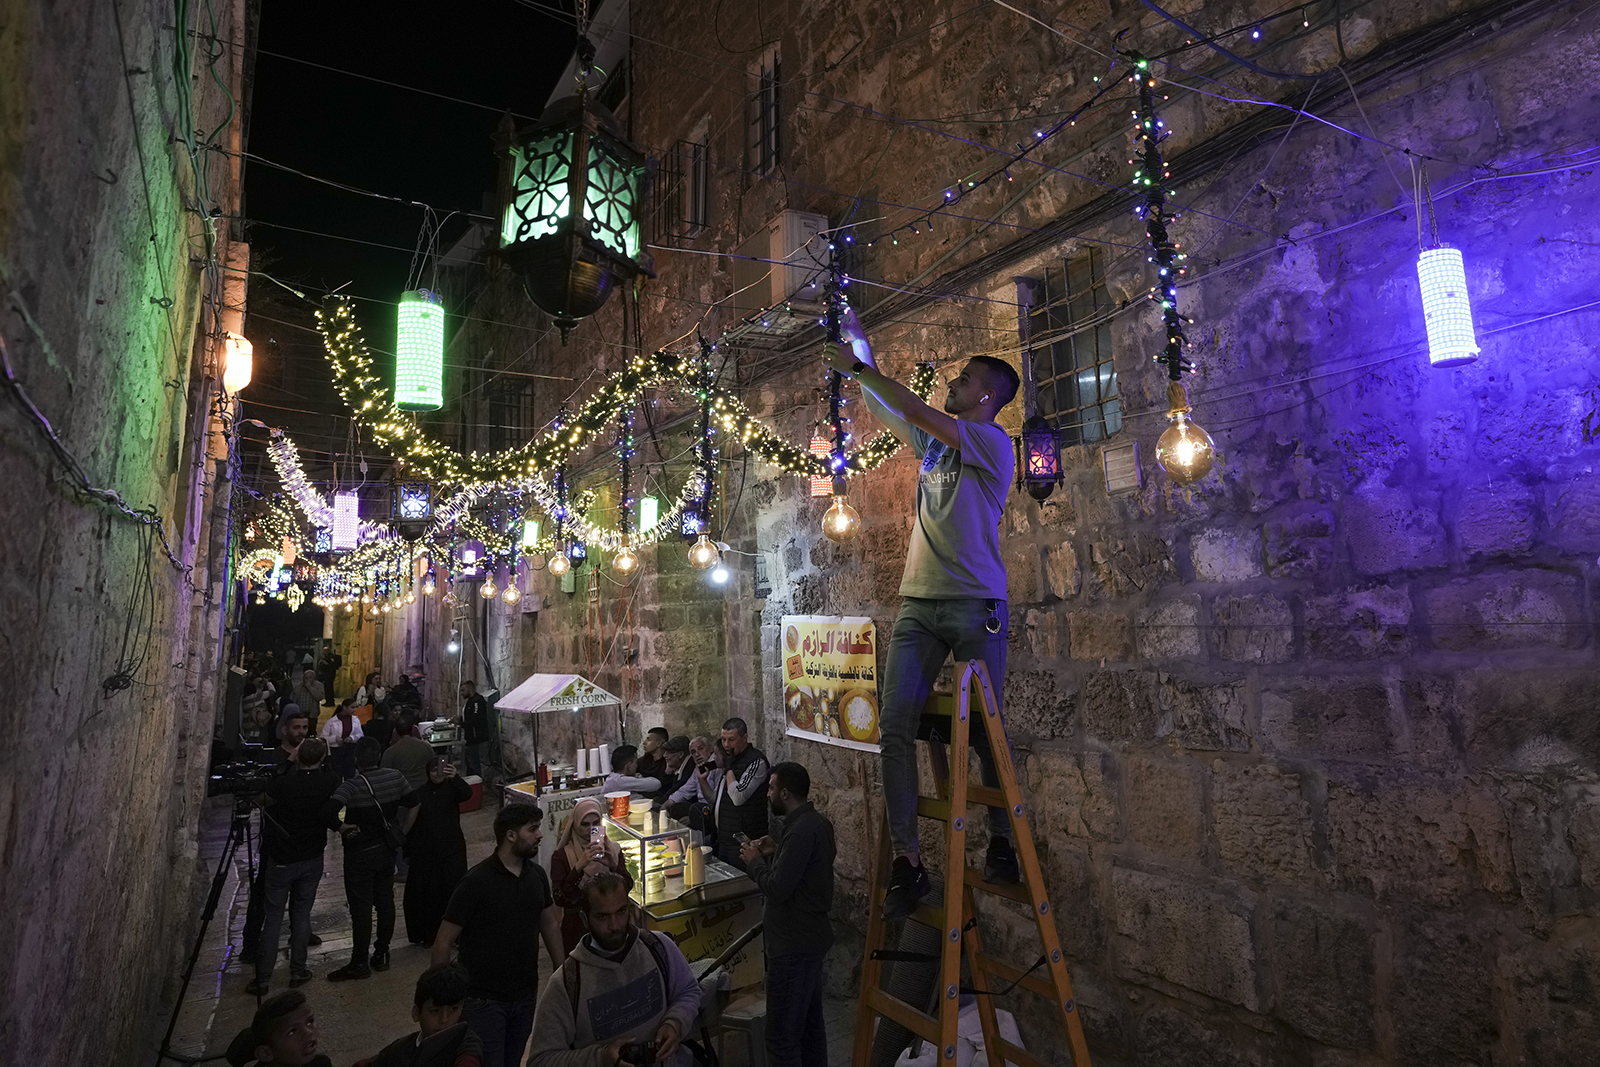 A Palestinian man hangs decorative lights in preparation for the holy Muslim month of Ramadan, at the streets of Jerusalem's Old City, Friday, April 1, 2022. (AP Photo/Mahmoud Illean)